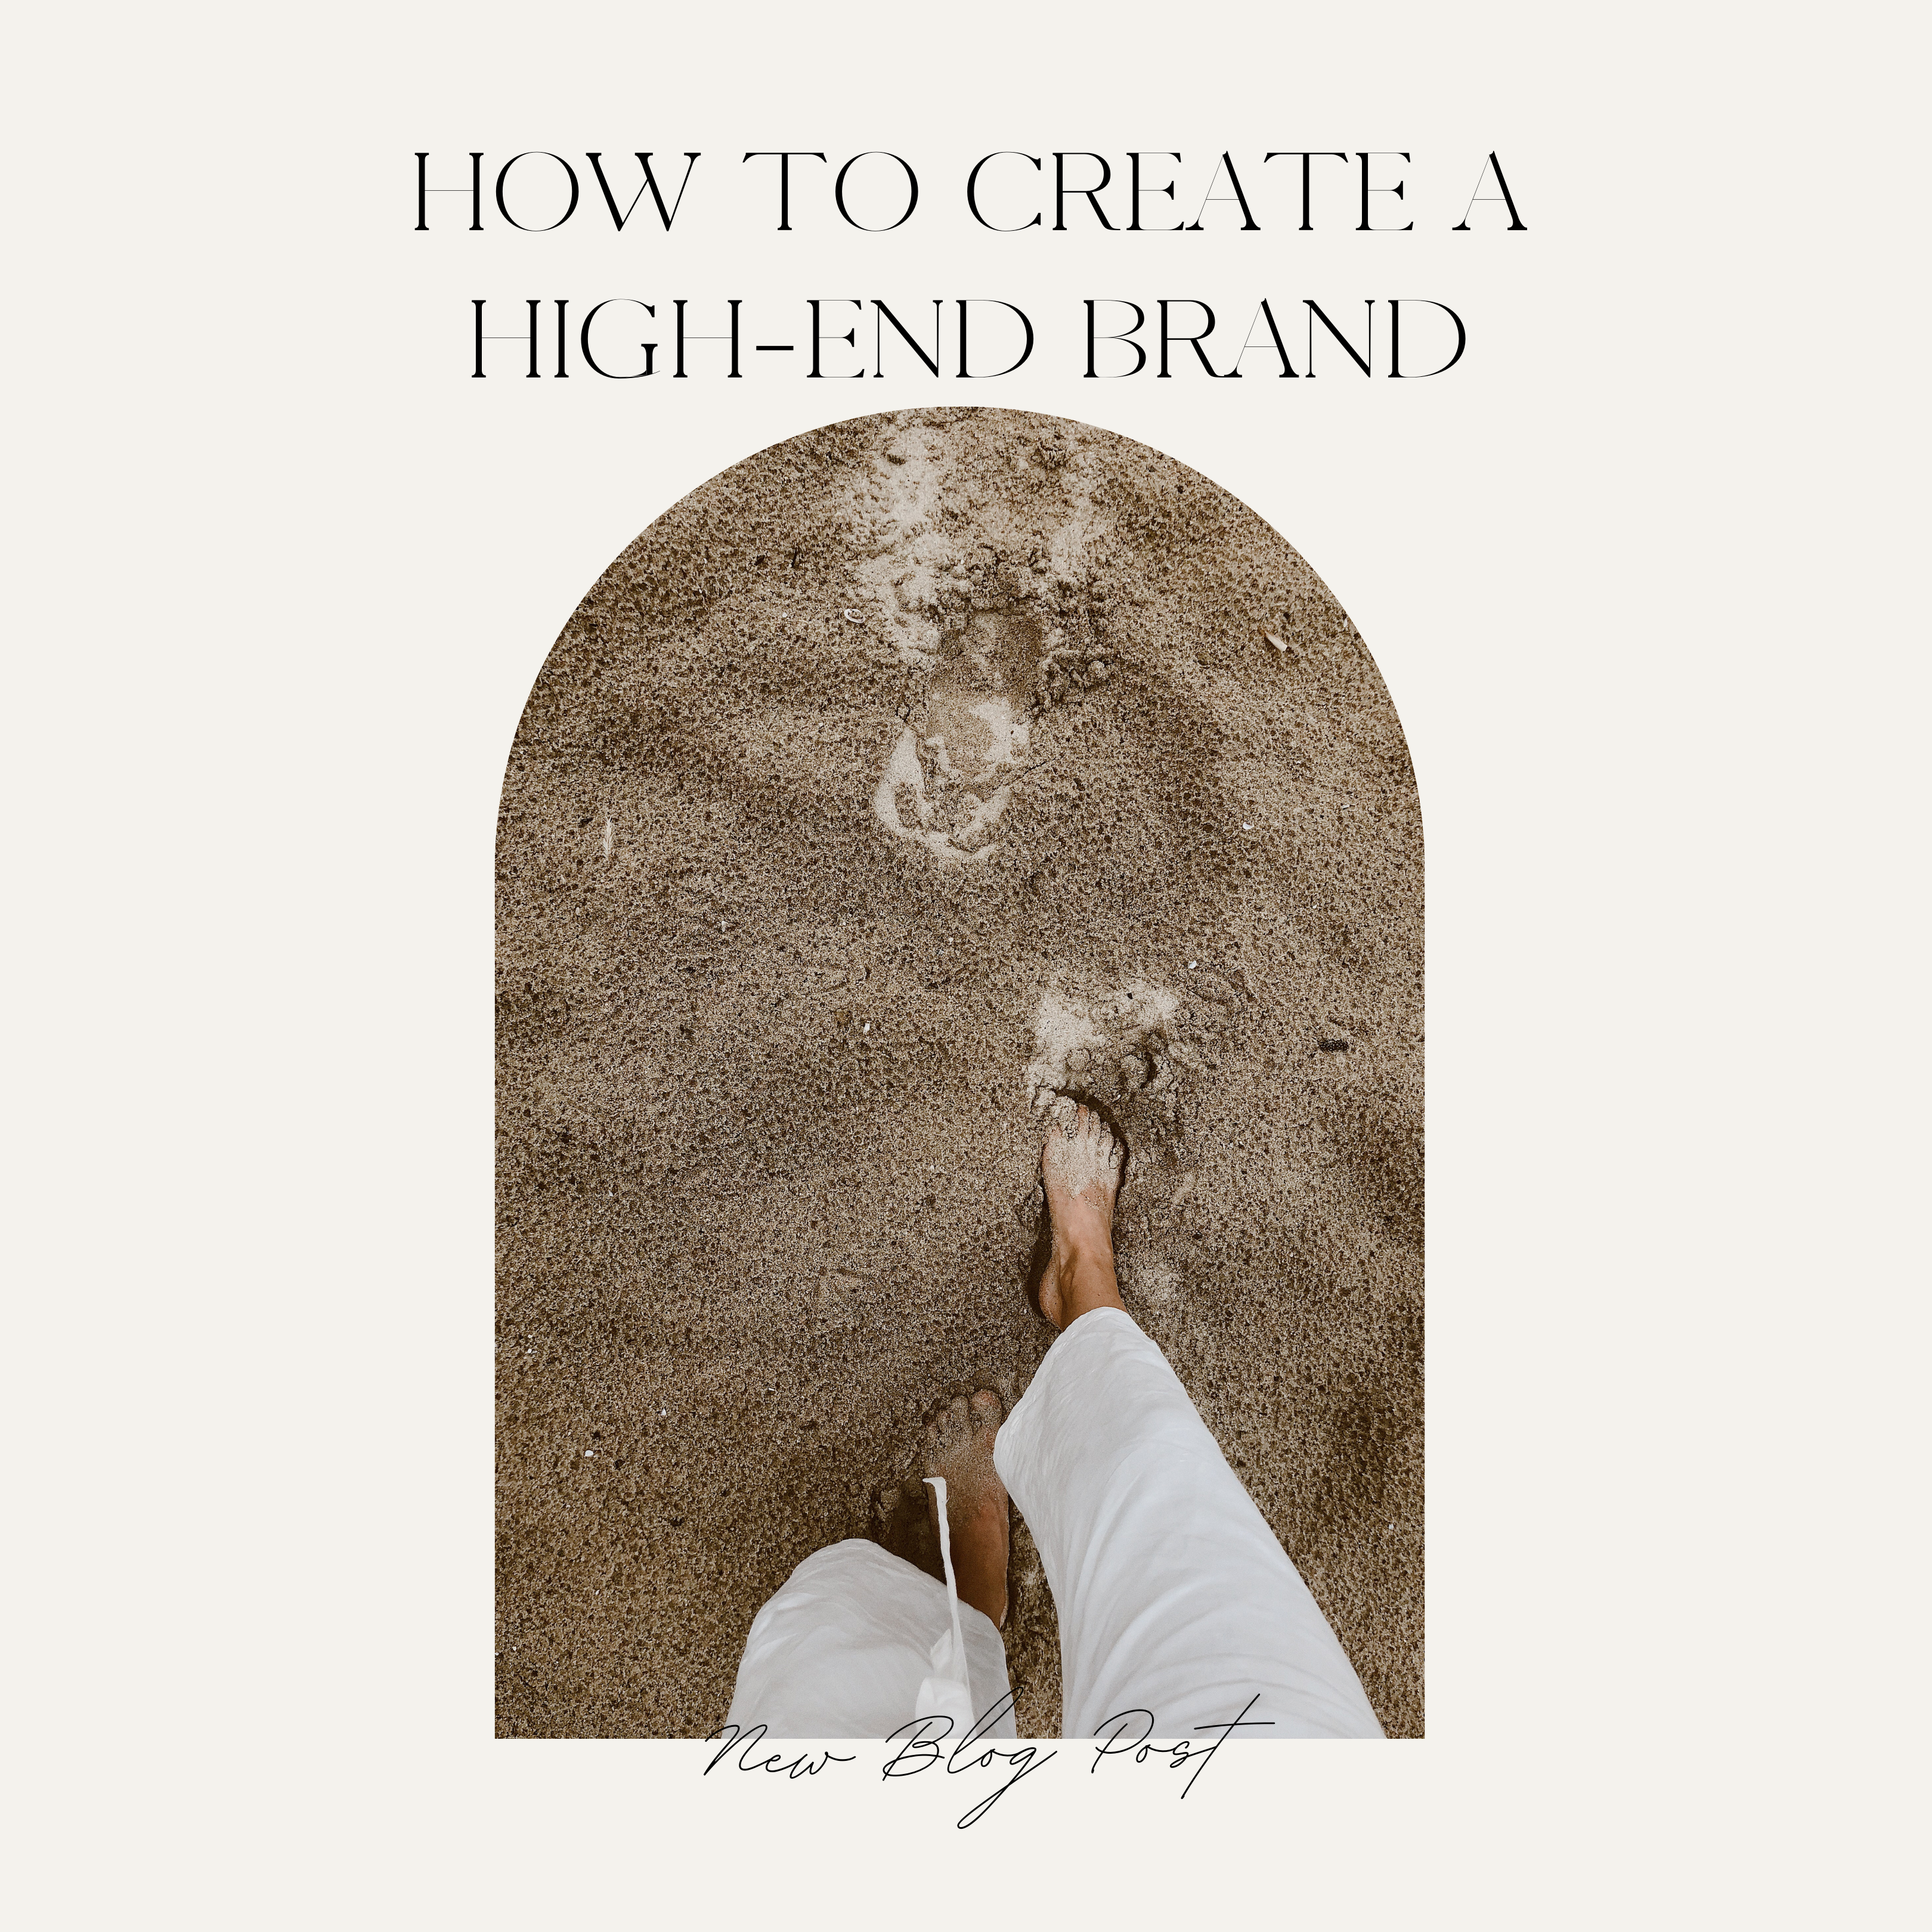 How To Create A High-End Brand